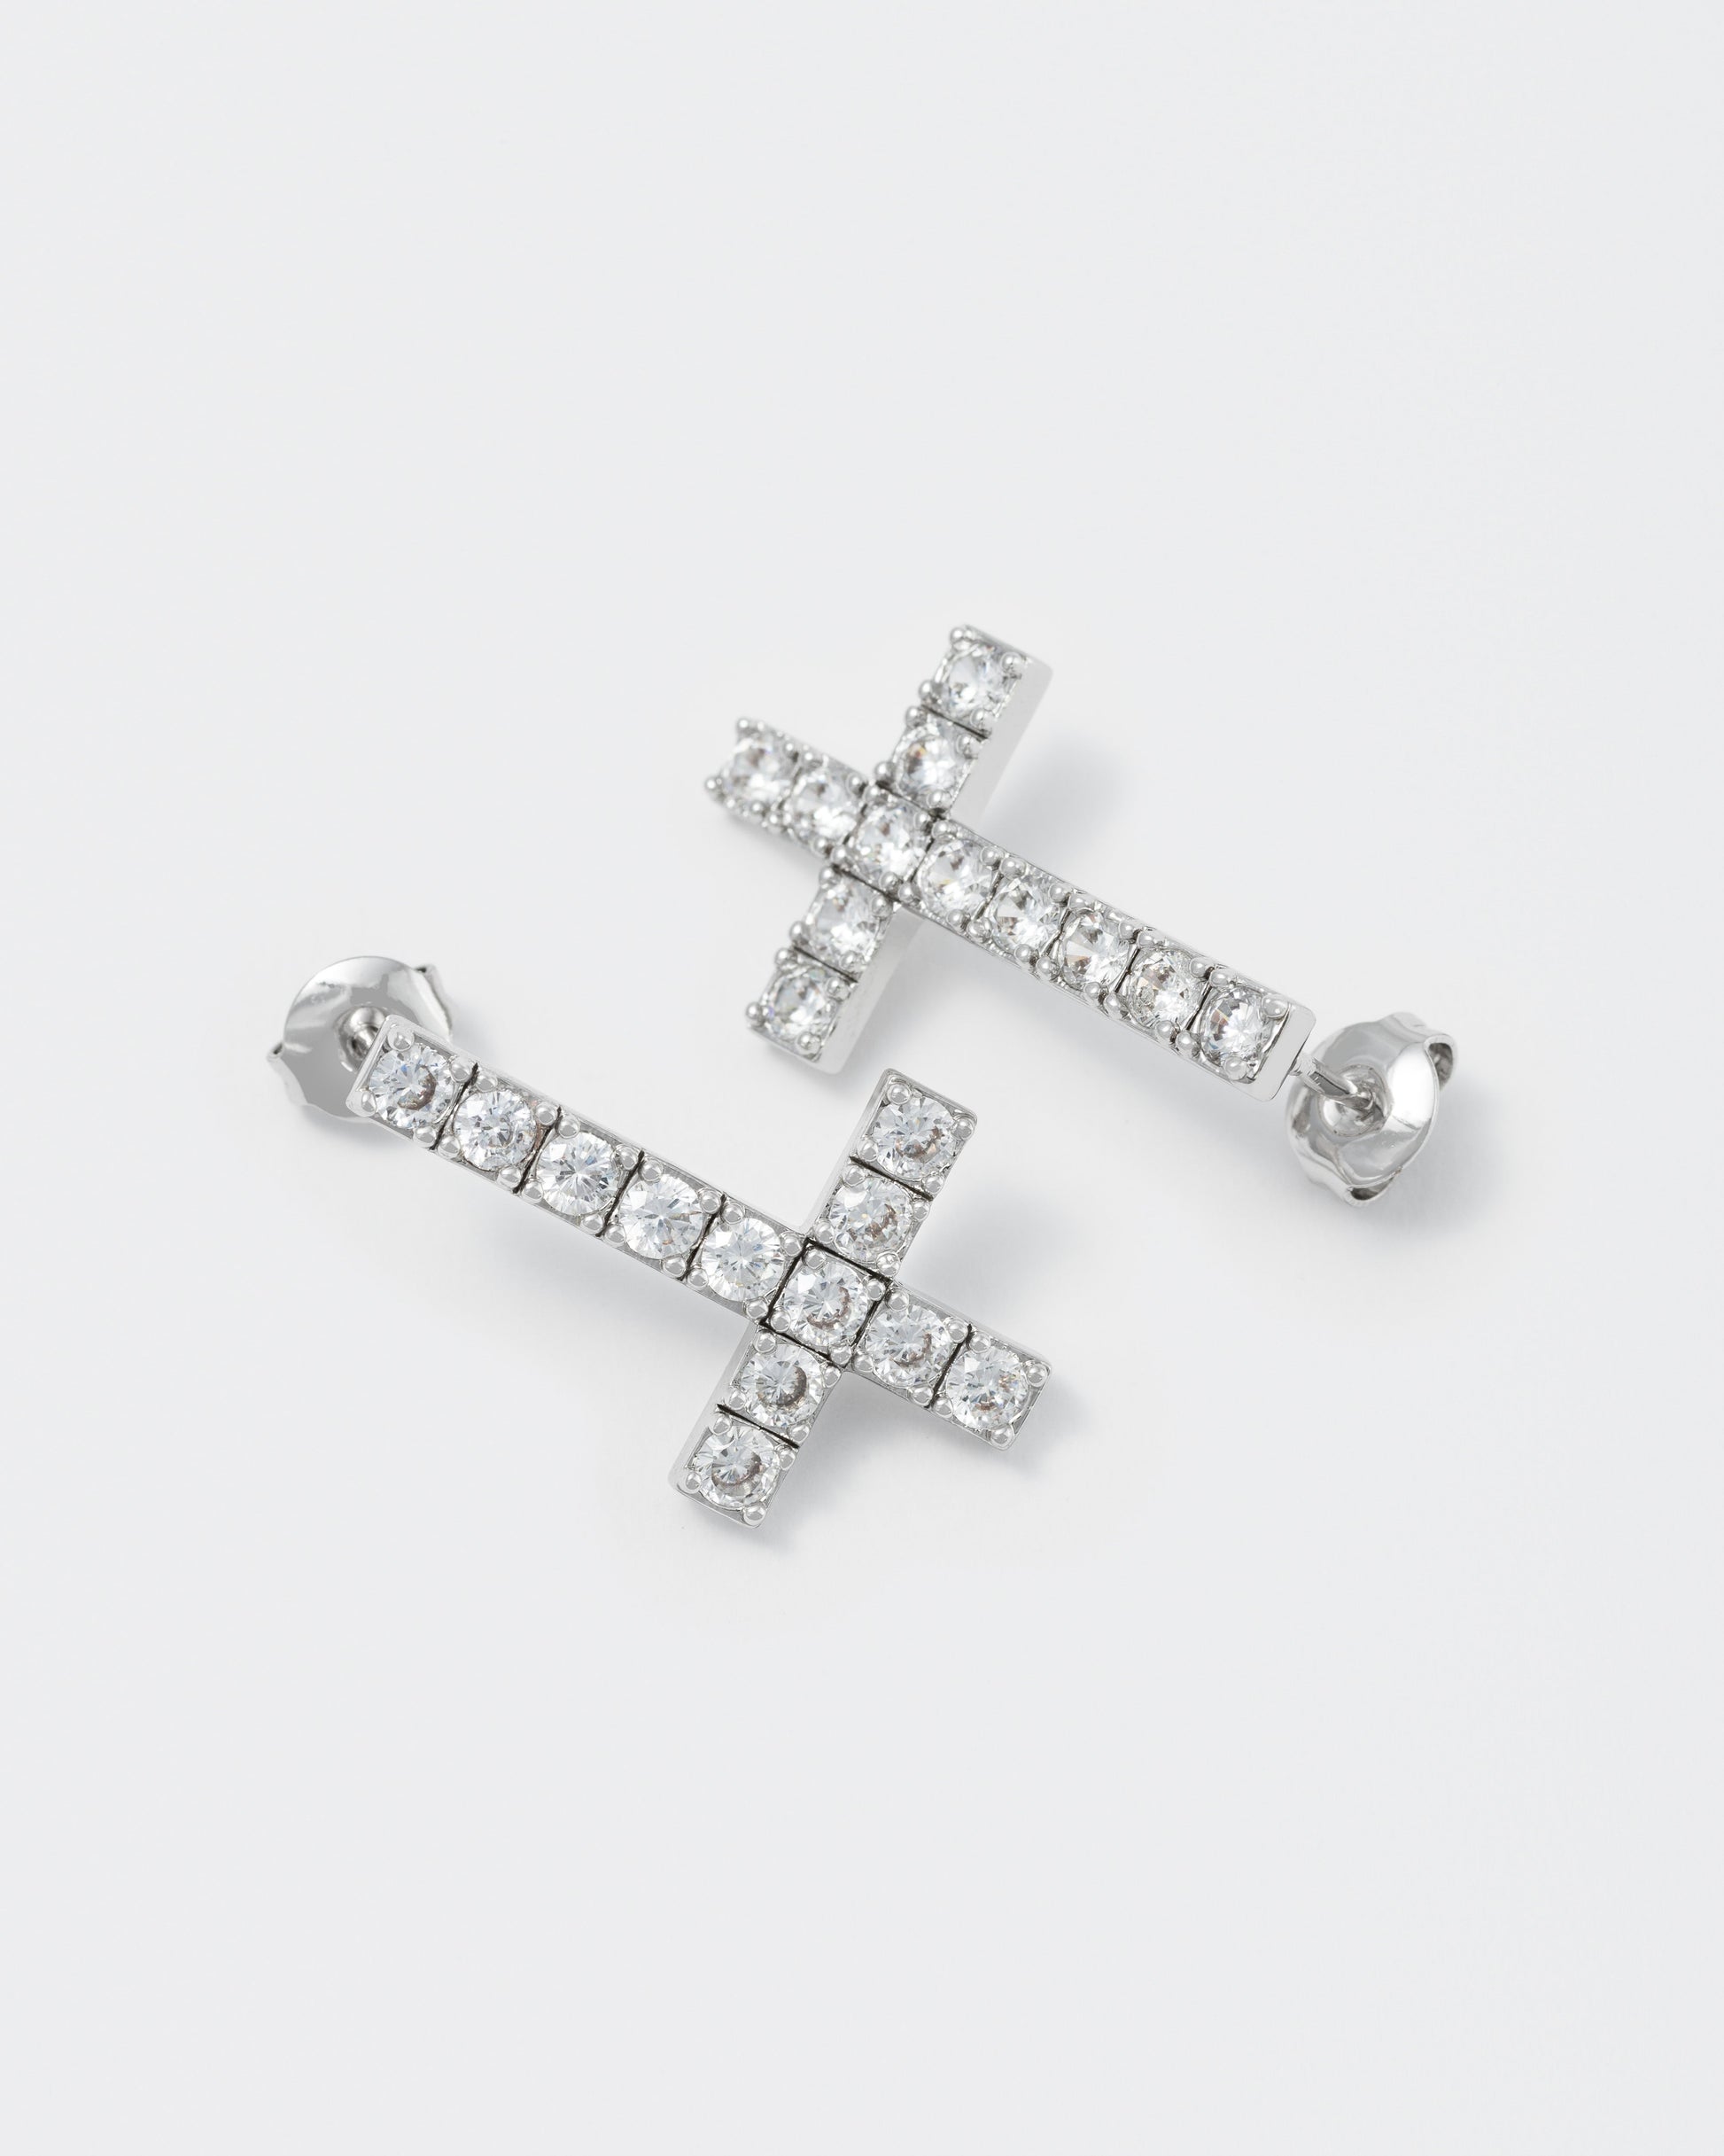 detail of reversed cross earrings with 18kt white gold coating with round brilliant-cut stones in diamond white. Silver 925 pin and butterfly closure with logo